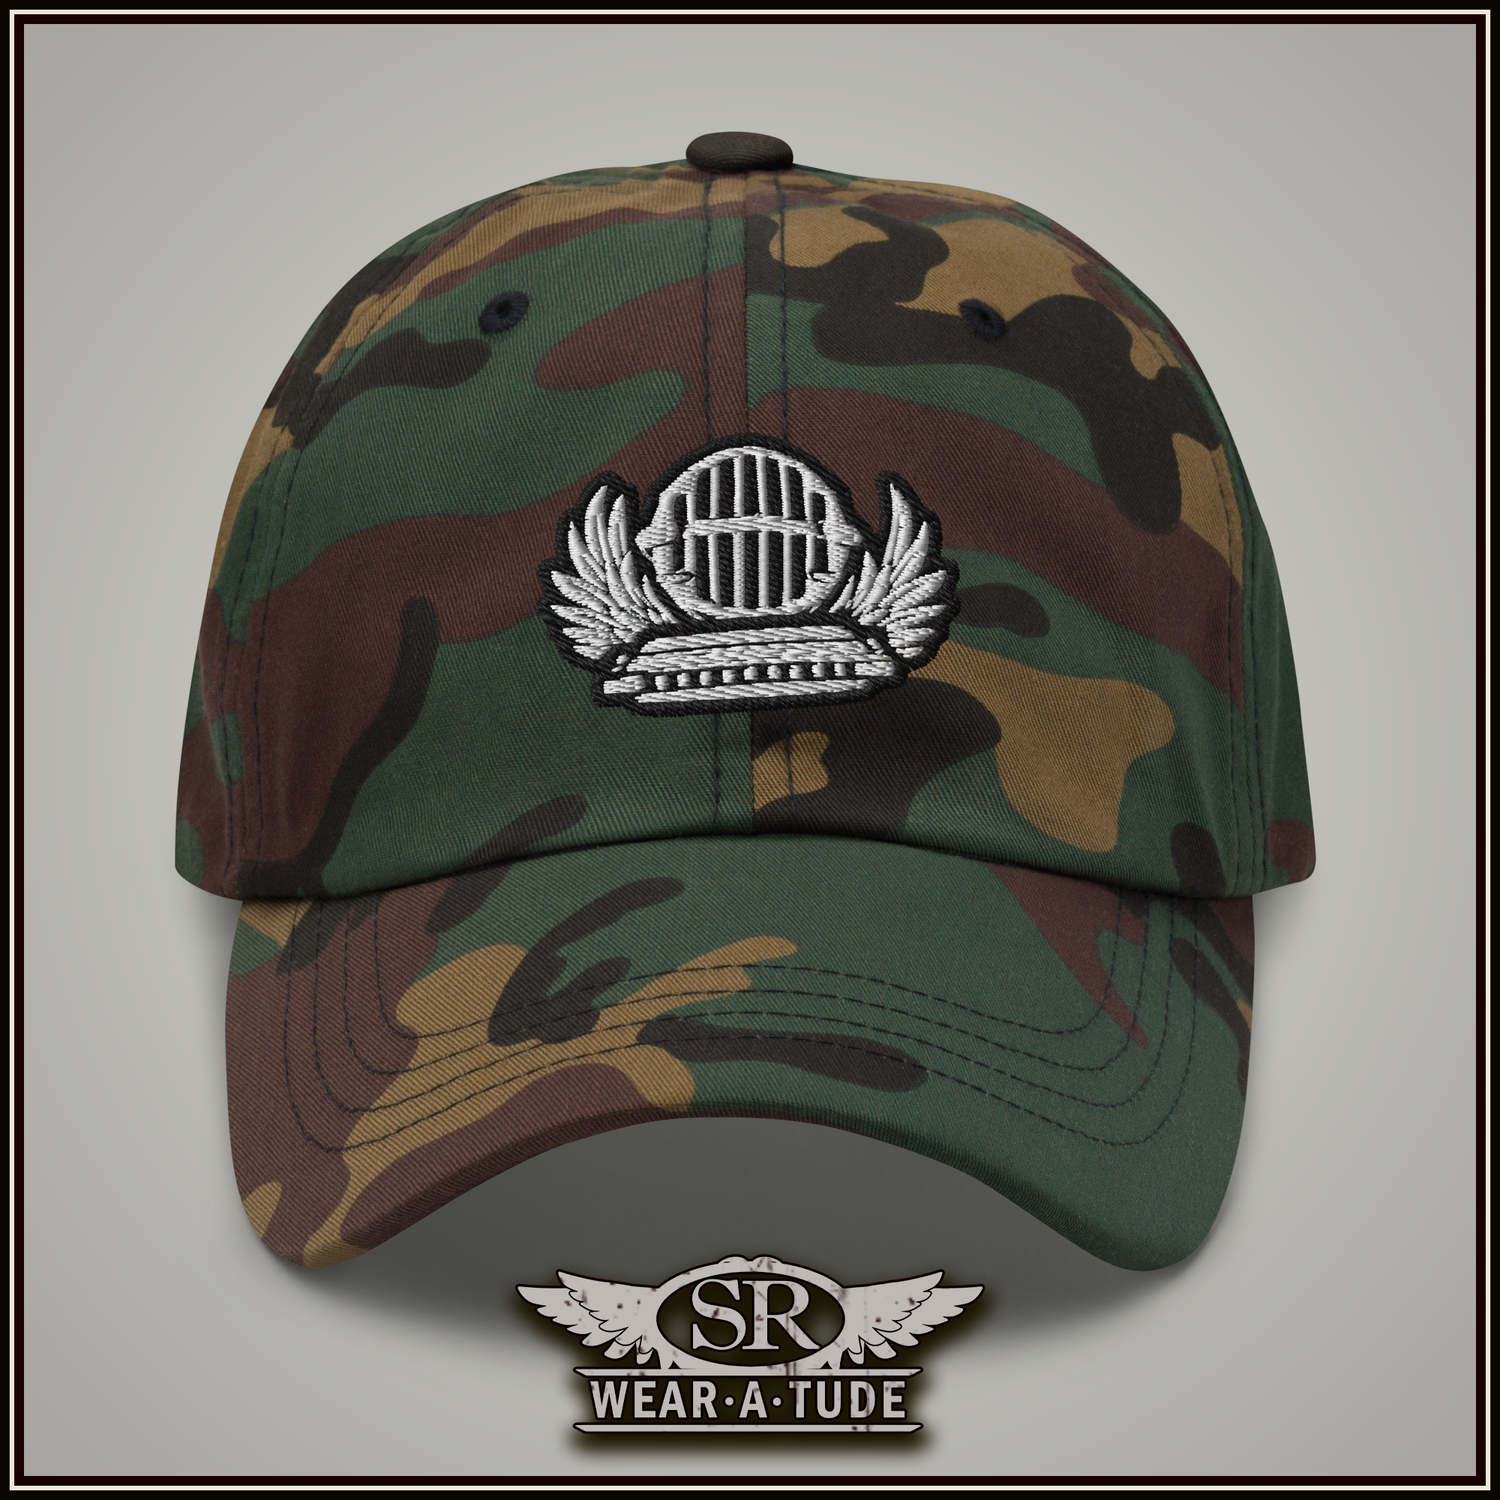 Blues Harp and JT30 mic ball hat in camo by SR Wear Atude